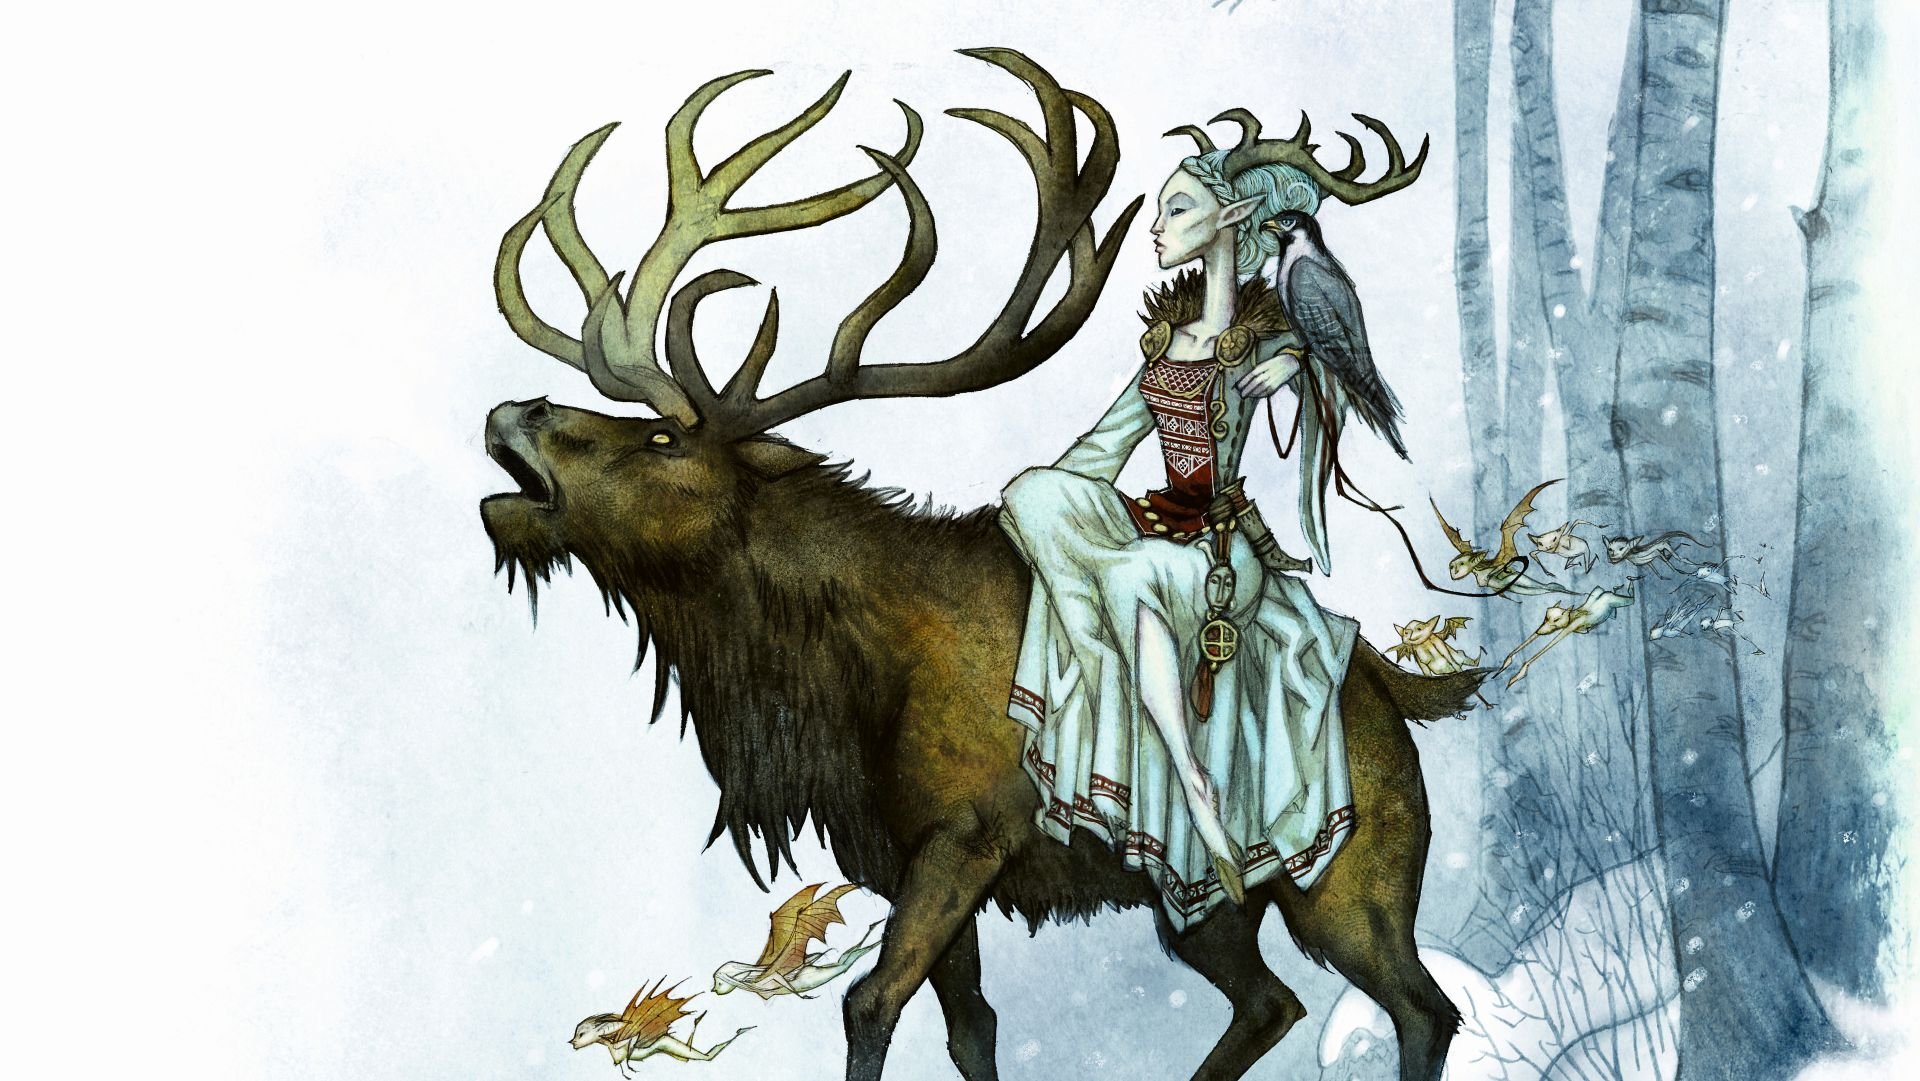 A pale blue horned woman riding an elk with fairies flying around her.